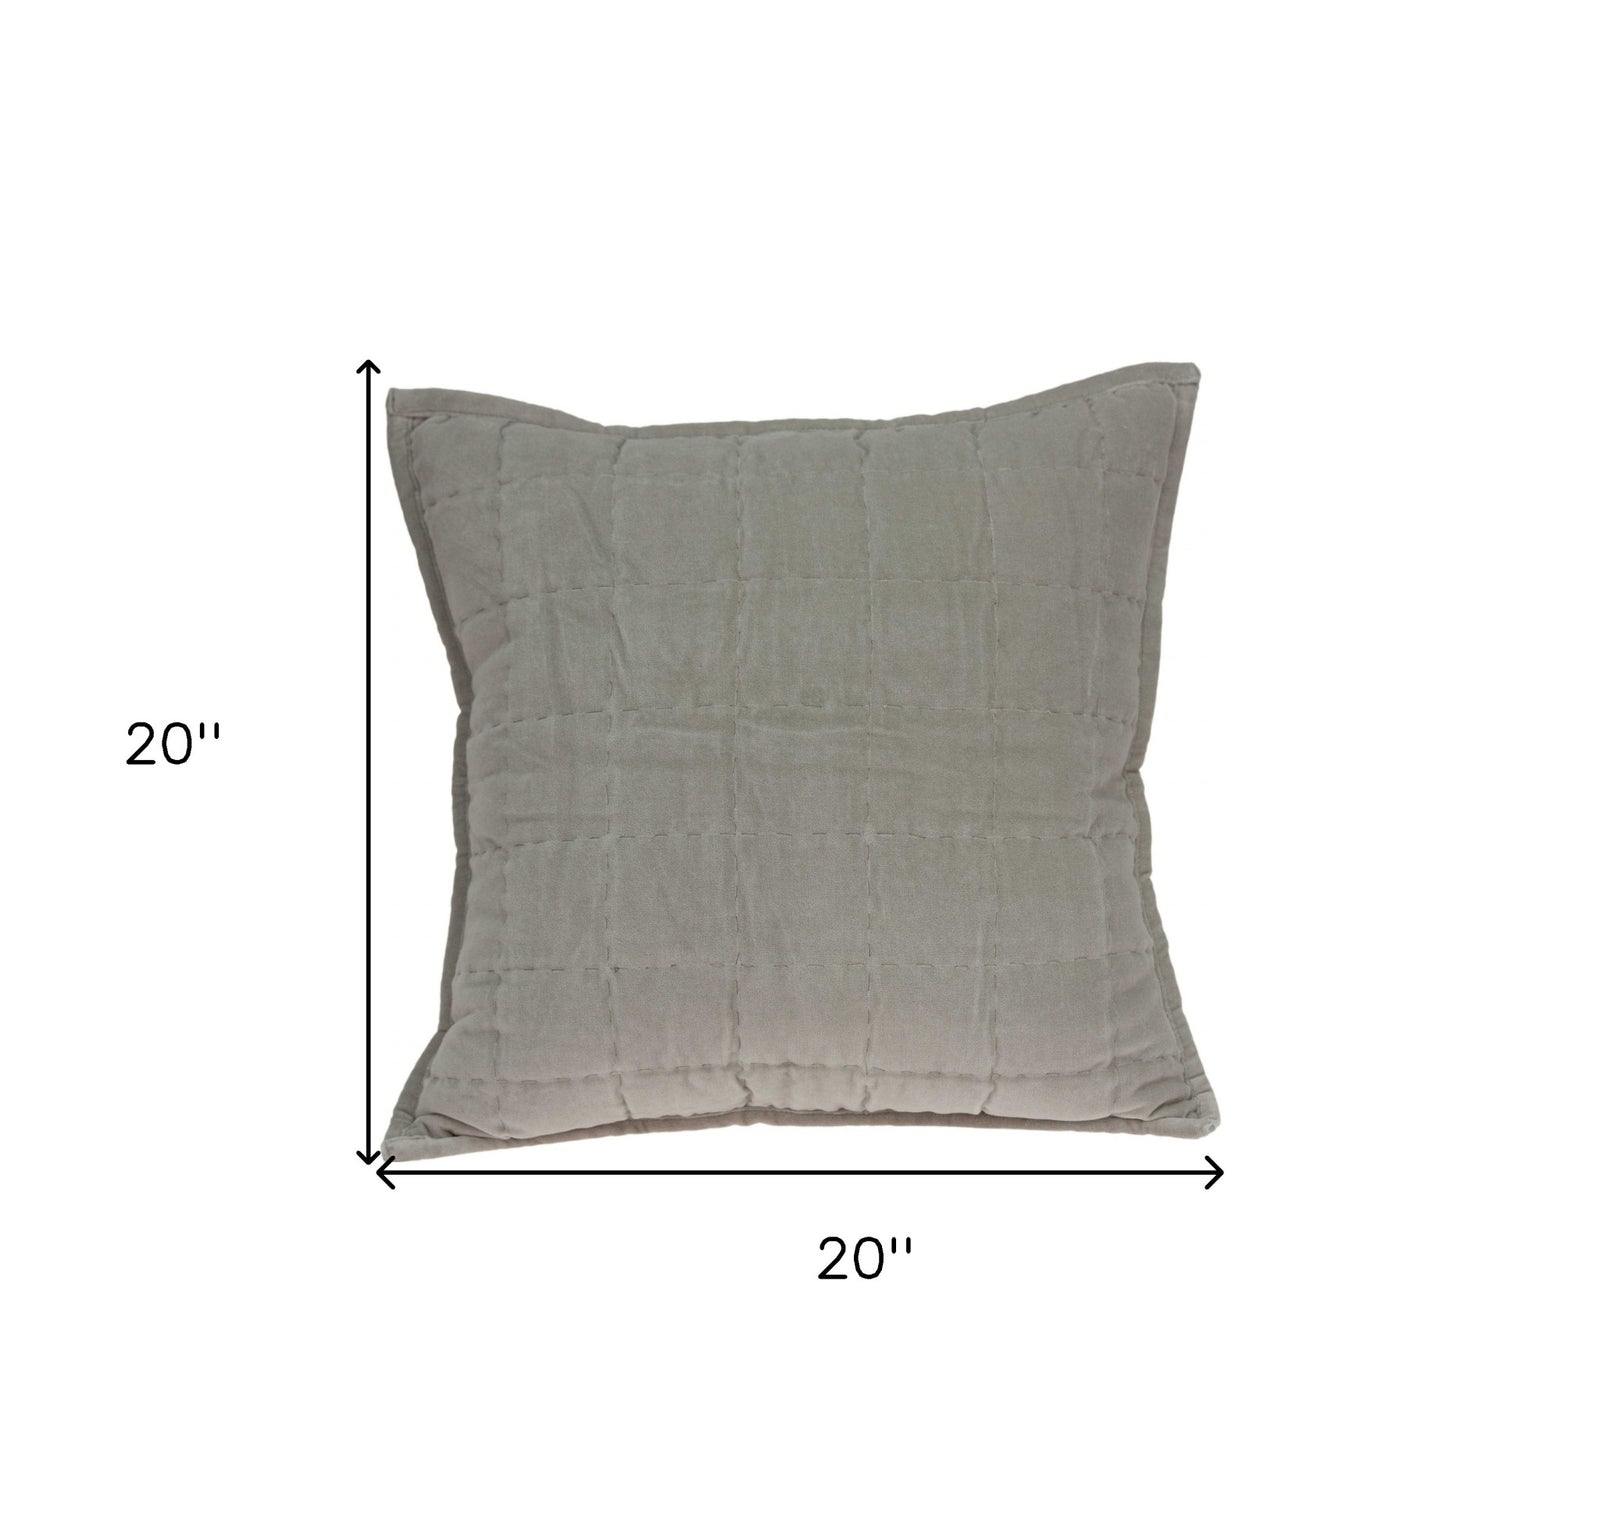 20" X 7" X 20" Transitional Gray Solid Quilted Pillow Cover With Poly Insert